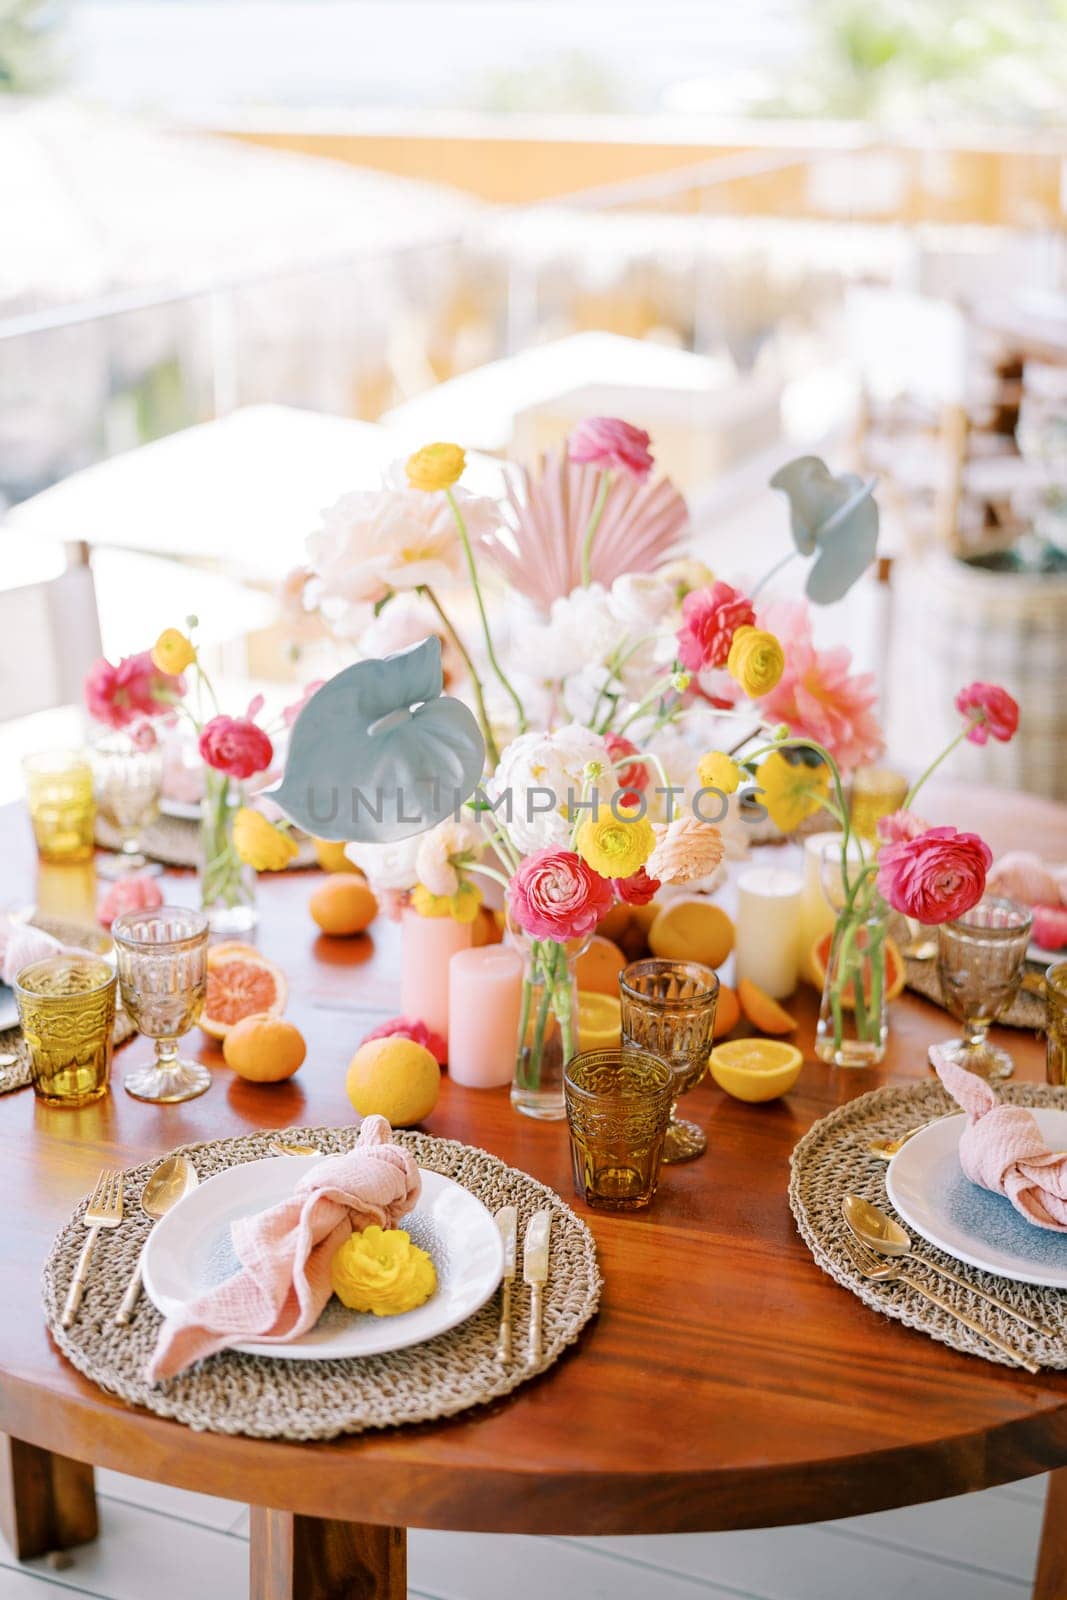 Plates with knotted napkins on mats stand on a festive table with colorful flowers by Nadtochiy